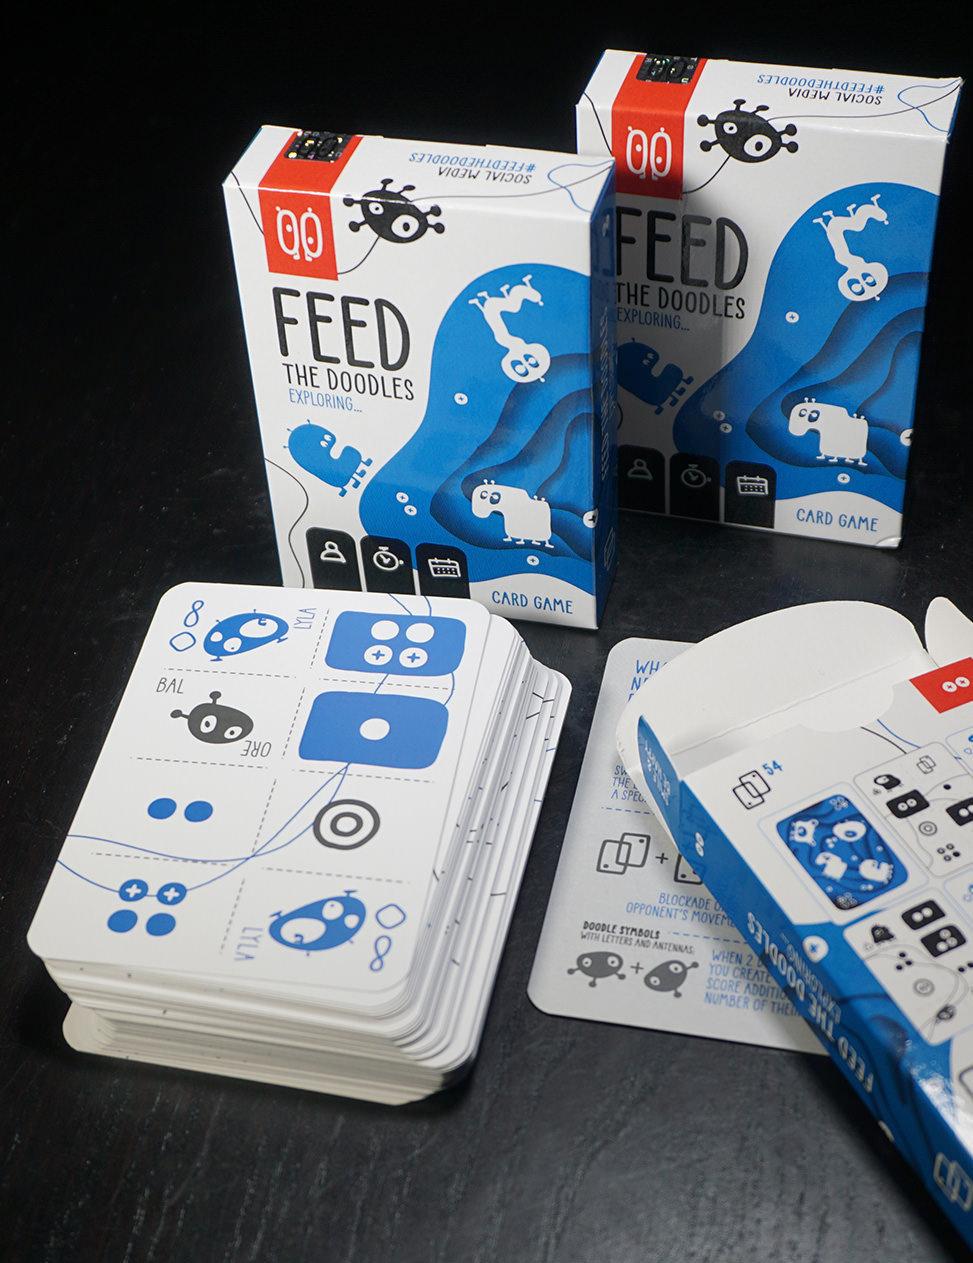 info-box-1-card-game-feed-the-doodle2-2020